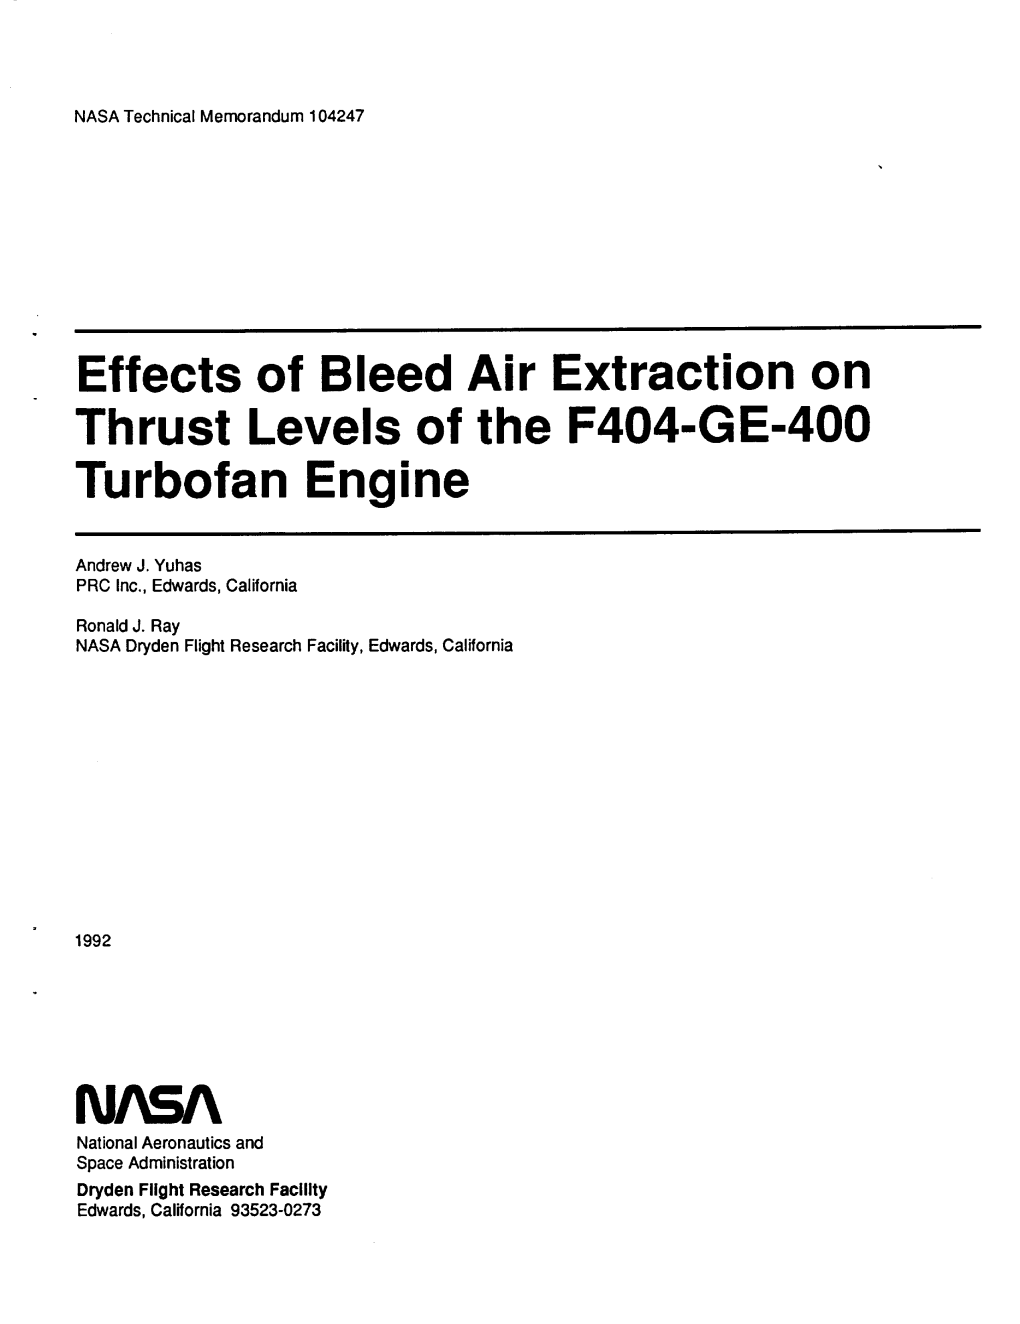 Effects of Bleed Air Extraction on Thrust Levels of the F404-GE-400 Turbofan Engine